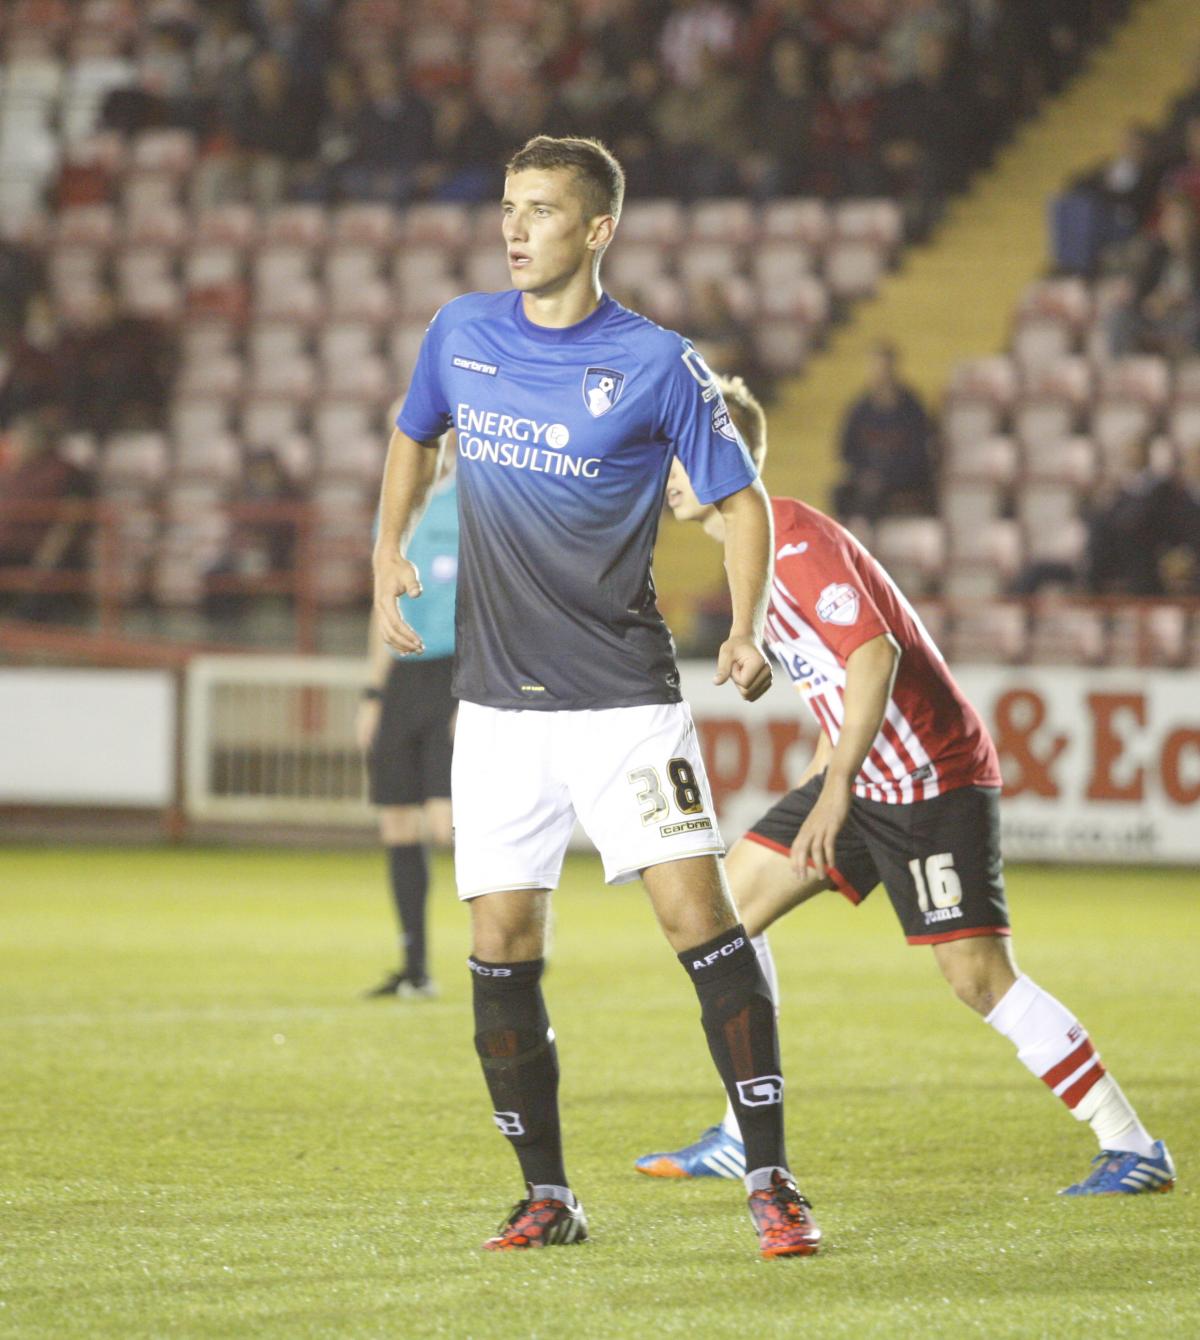 All our pictures of Exeter v AFC Bournemouth in the Capital One League Cup first round